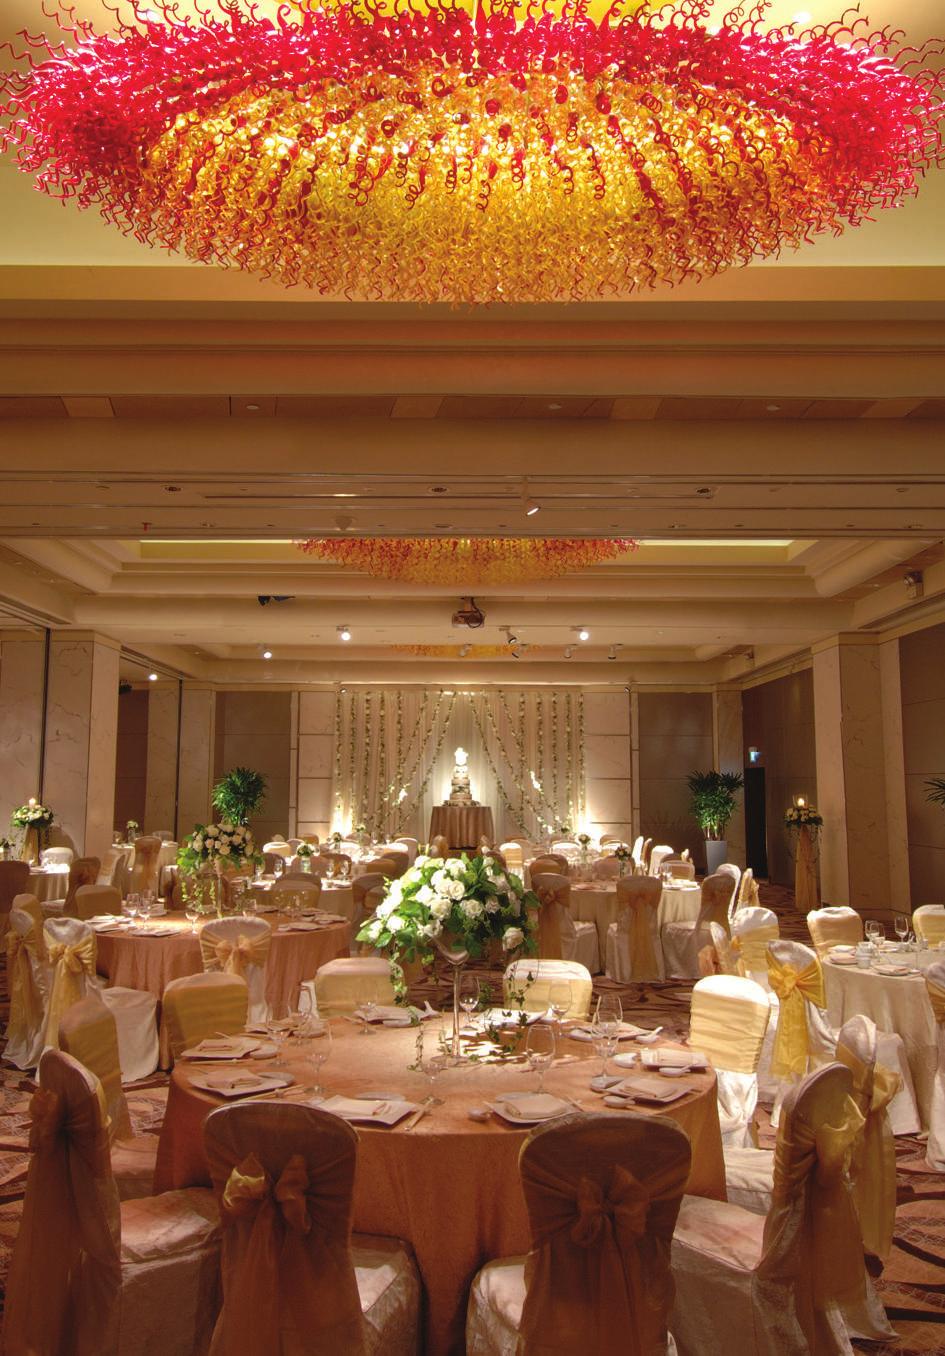 MEETINGS & EVENTS Capacities & Dimensions Length Width Ceiling Height Square Footage Classroom (3) Theatre Conference Banquet U-Shape Reception LEVEL 3 Grand Ballroom 103'10" 66'8" 13' 6,798 400 550